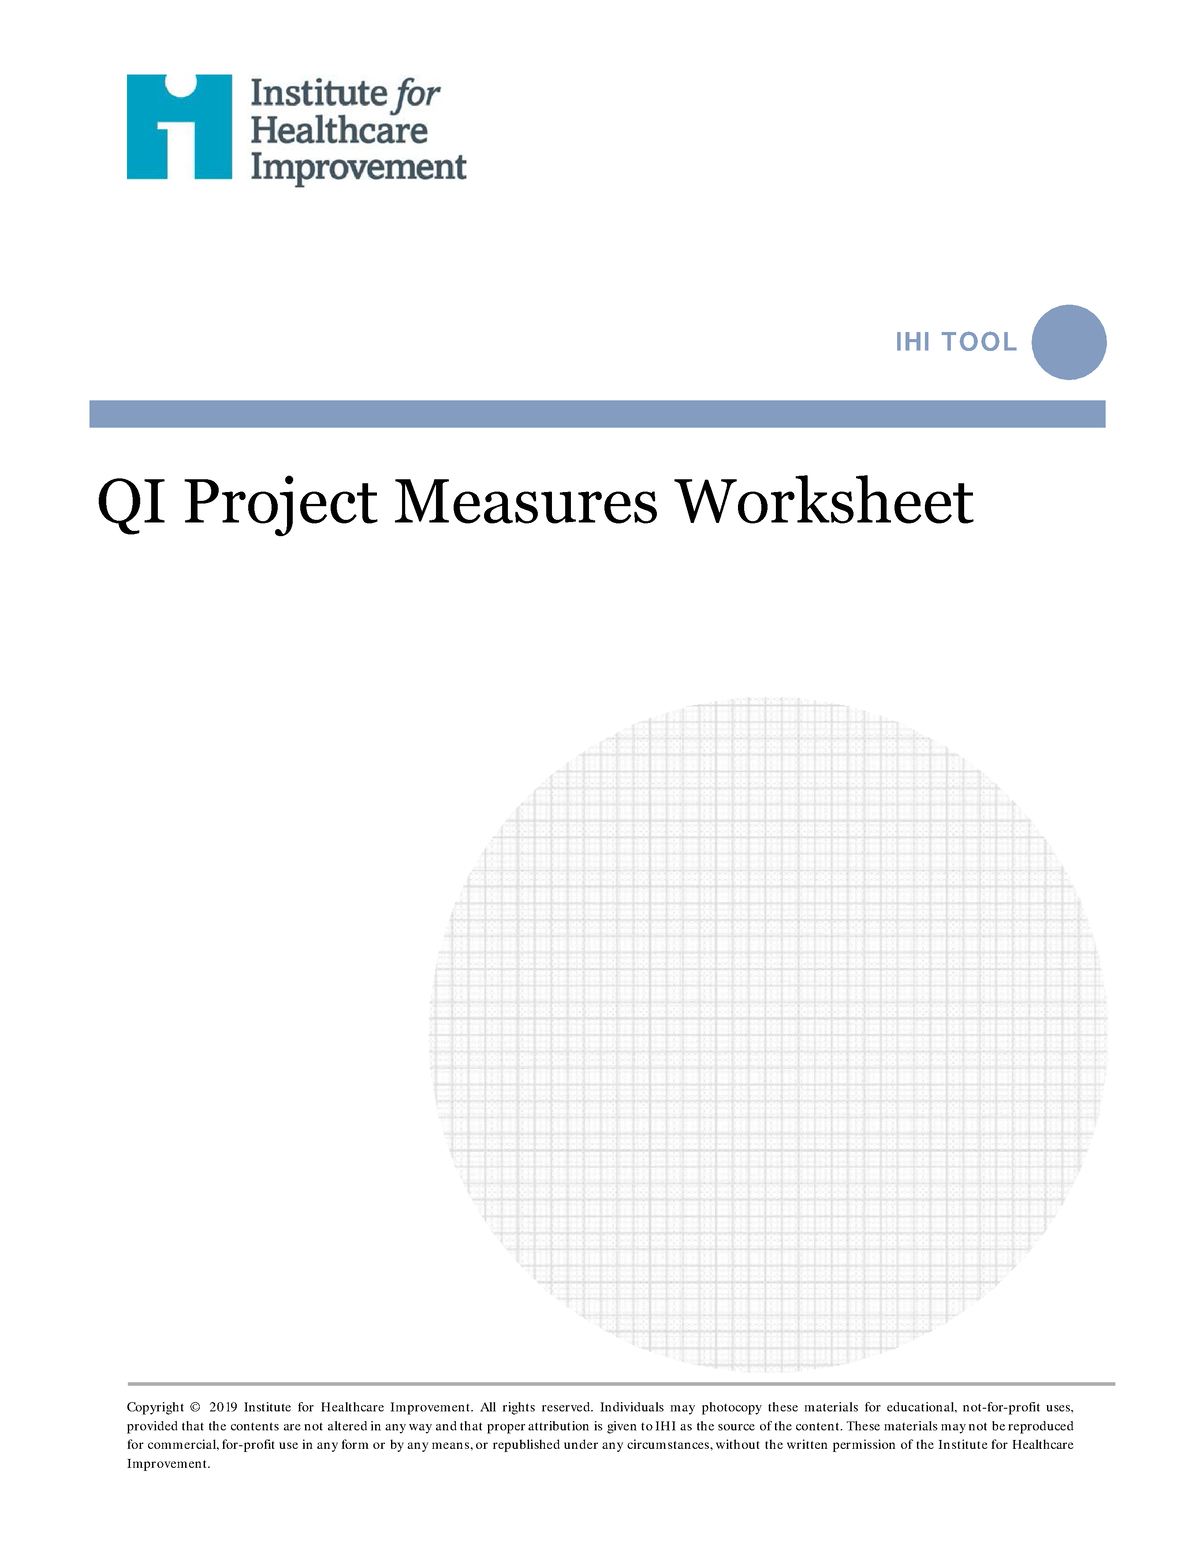 IHITool QIProject Measures Worksheet - IHI TOOL QI Project Measures ...